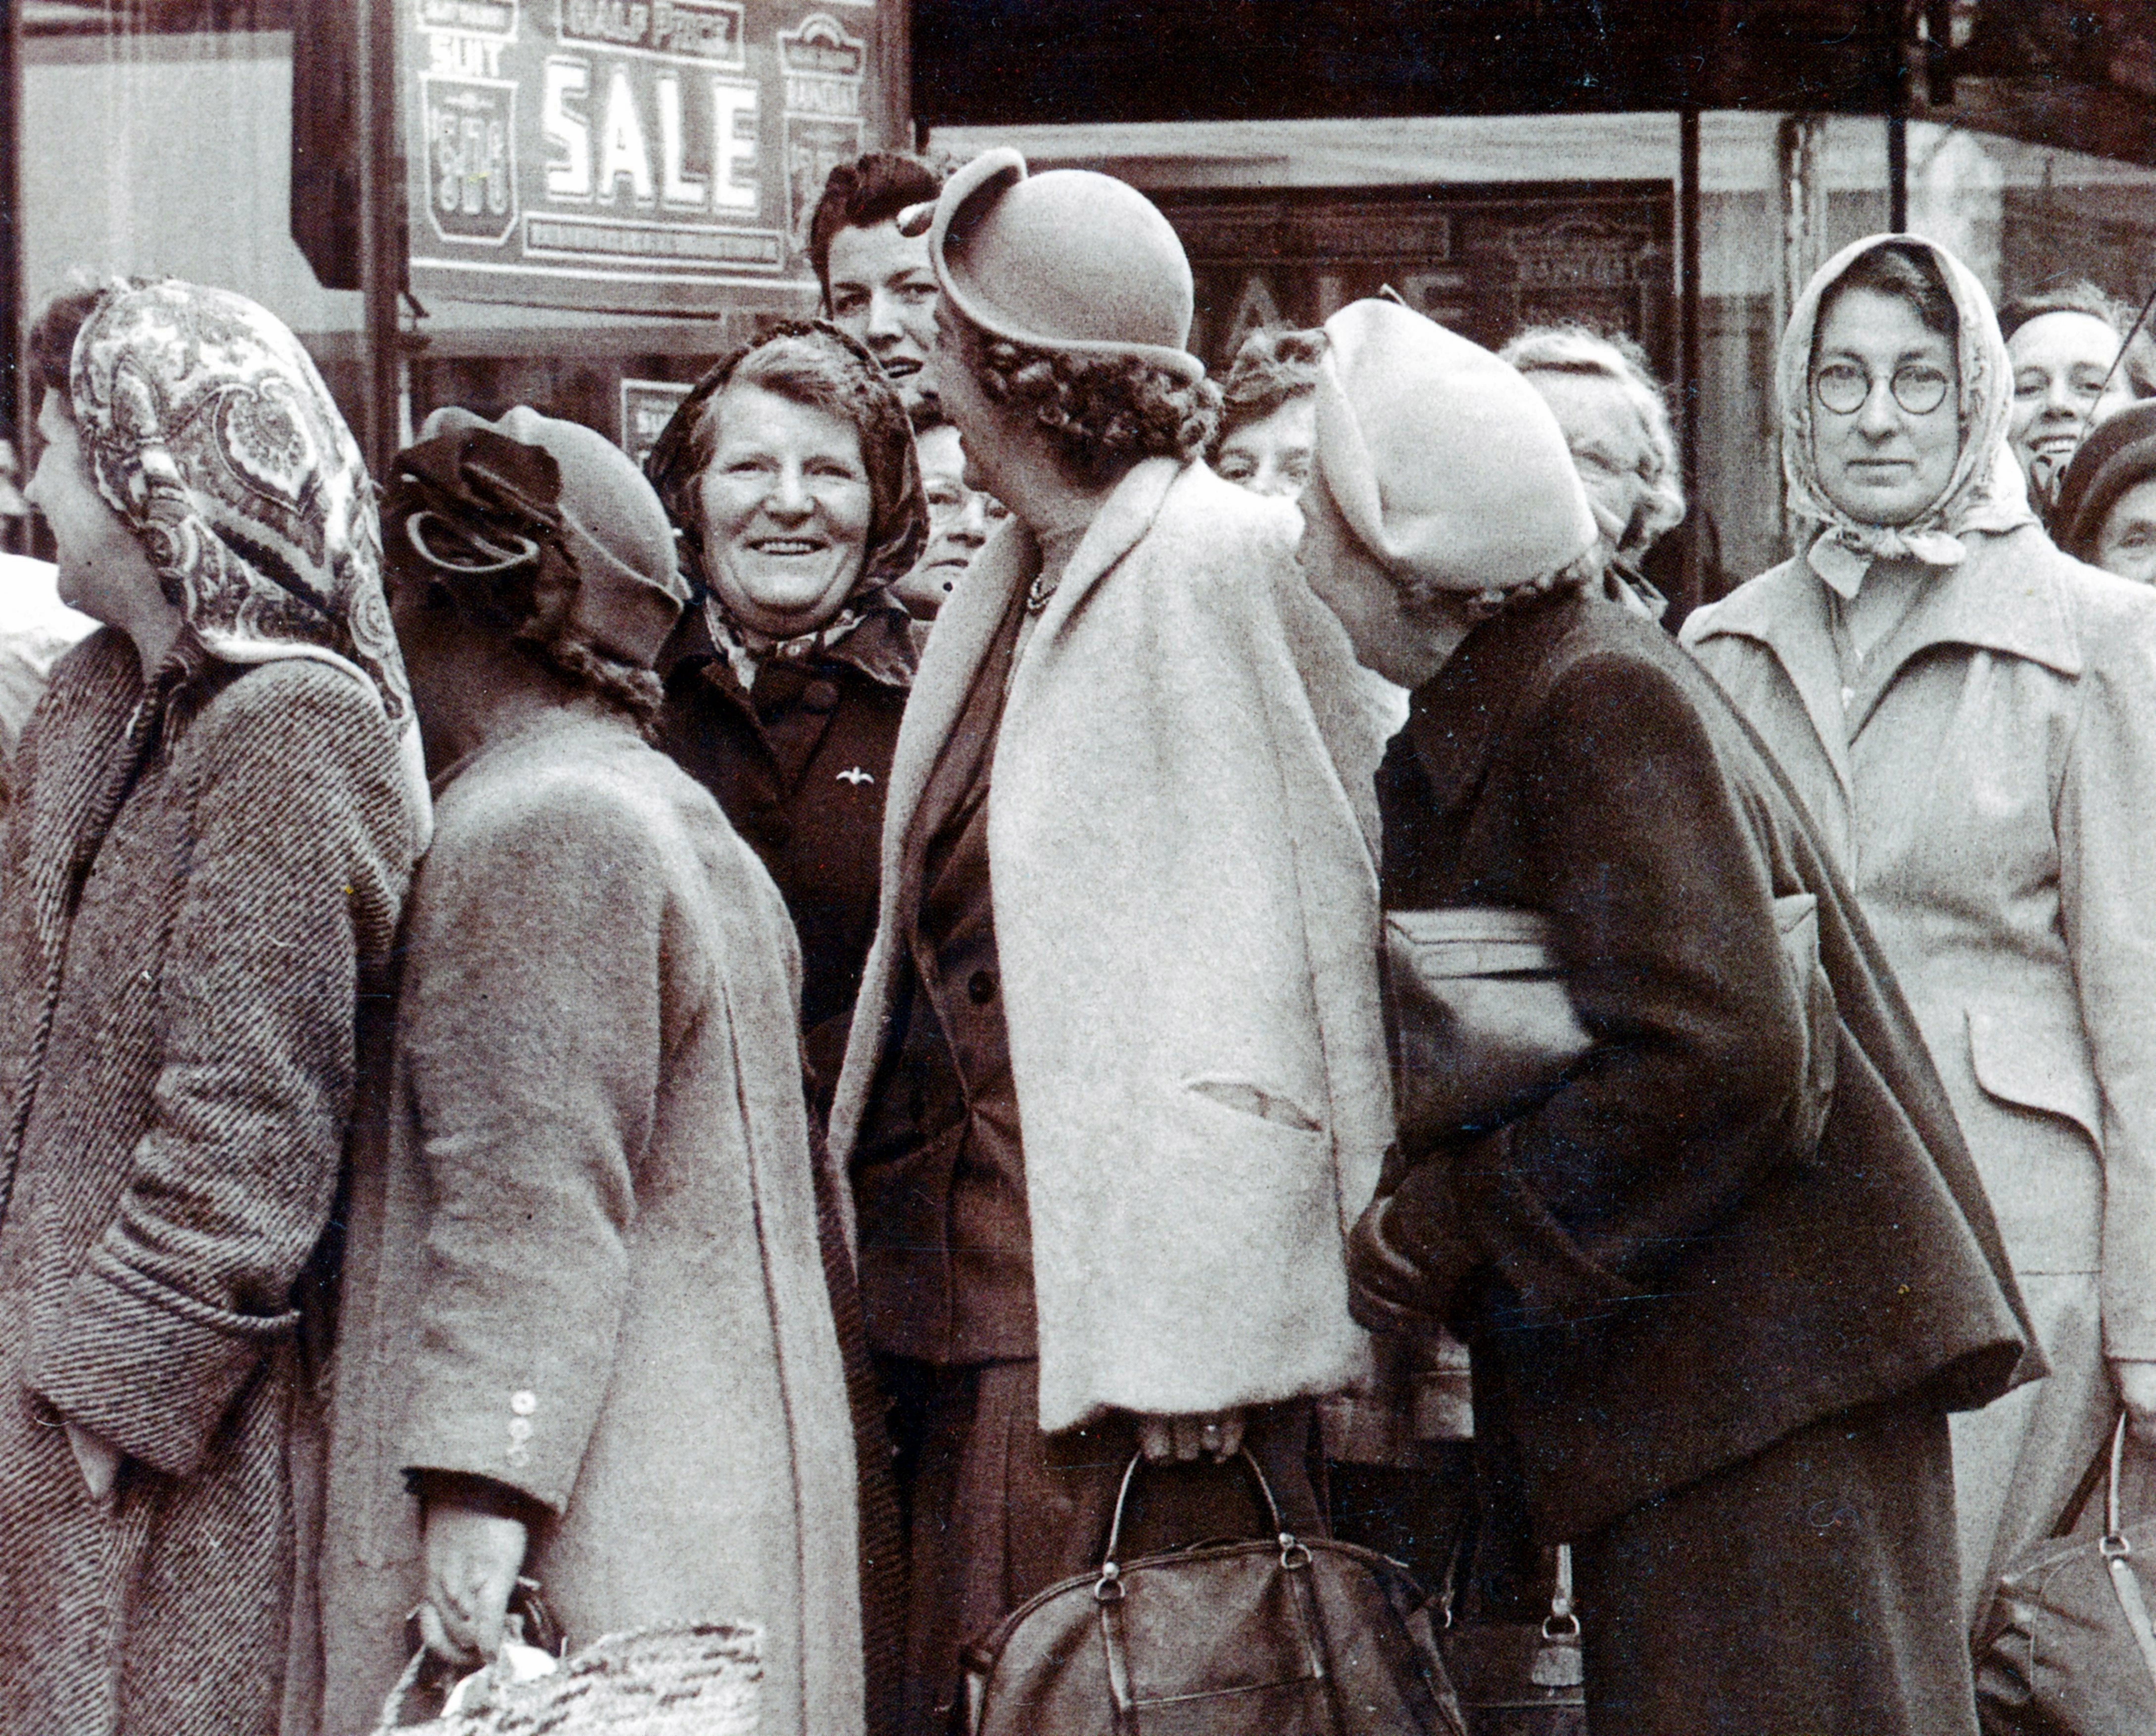 1950s Bristol Shoppers queue to get a bargain in the sales